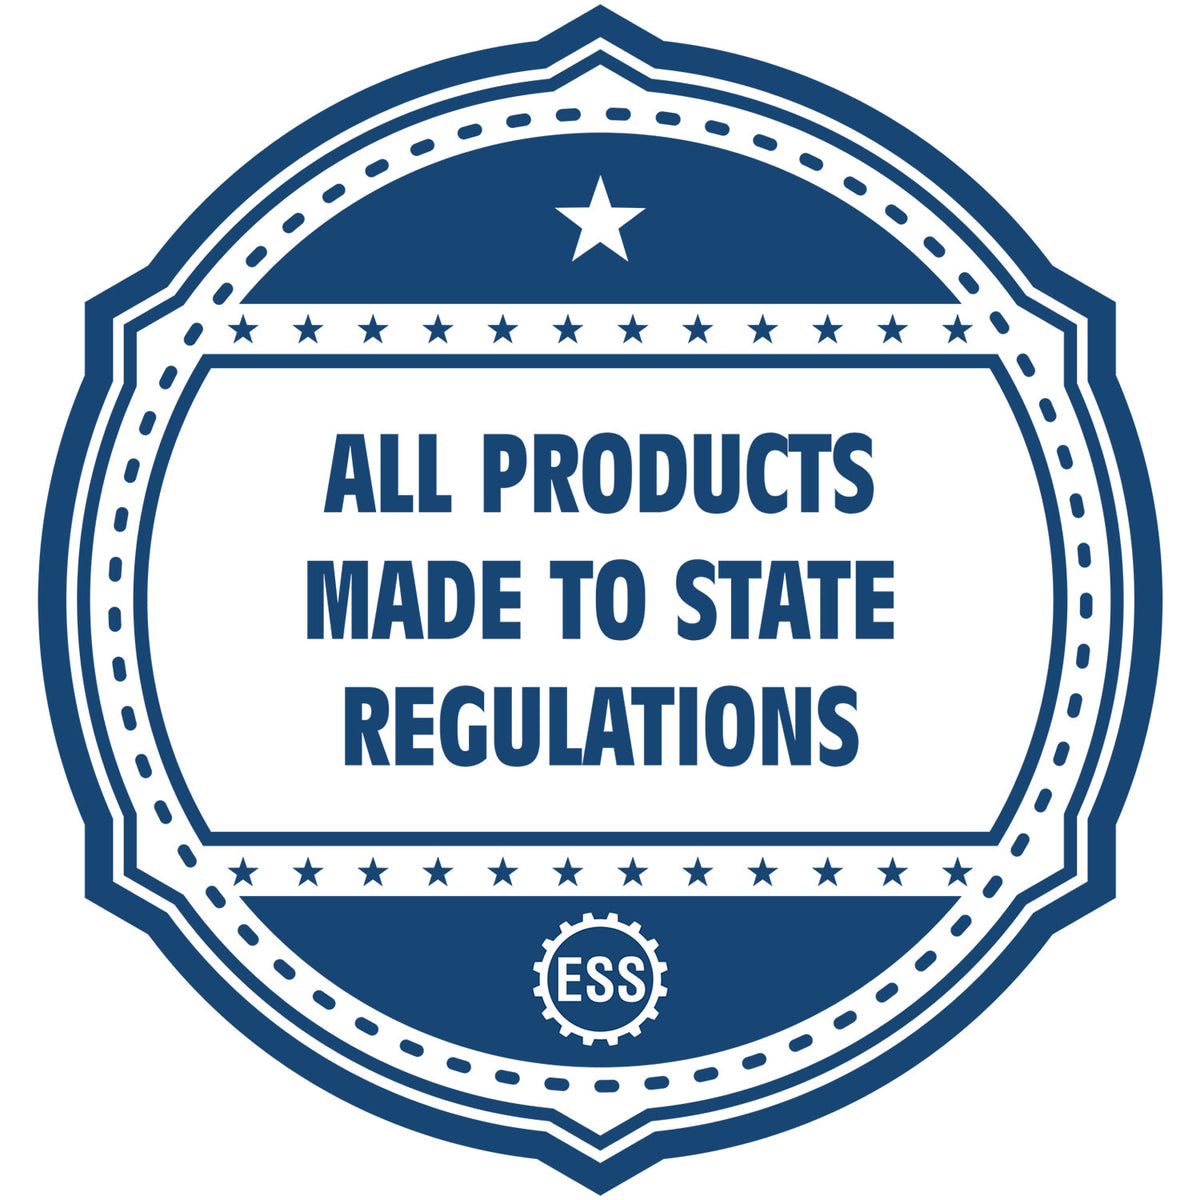 An icon or badge element for the State of New Hampshire Soft Land Surveyor Embossing Seal showing that this product is made in compliance with state regulations.